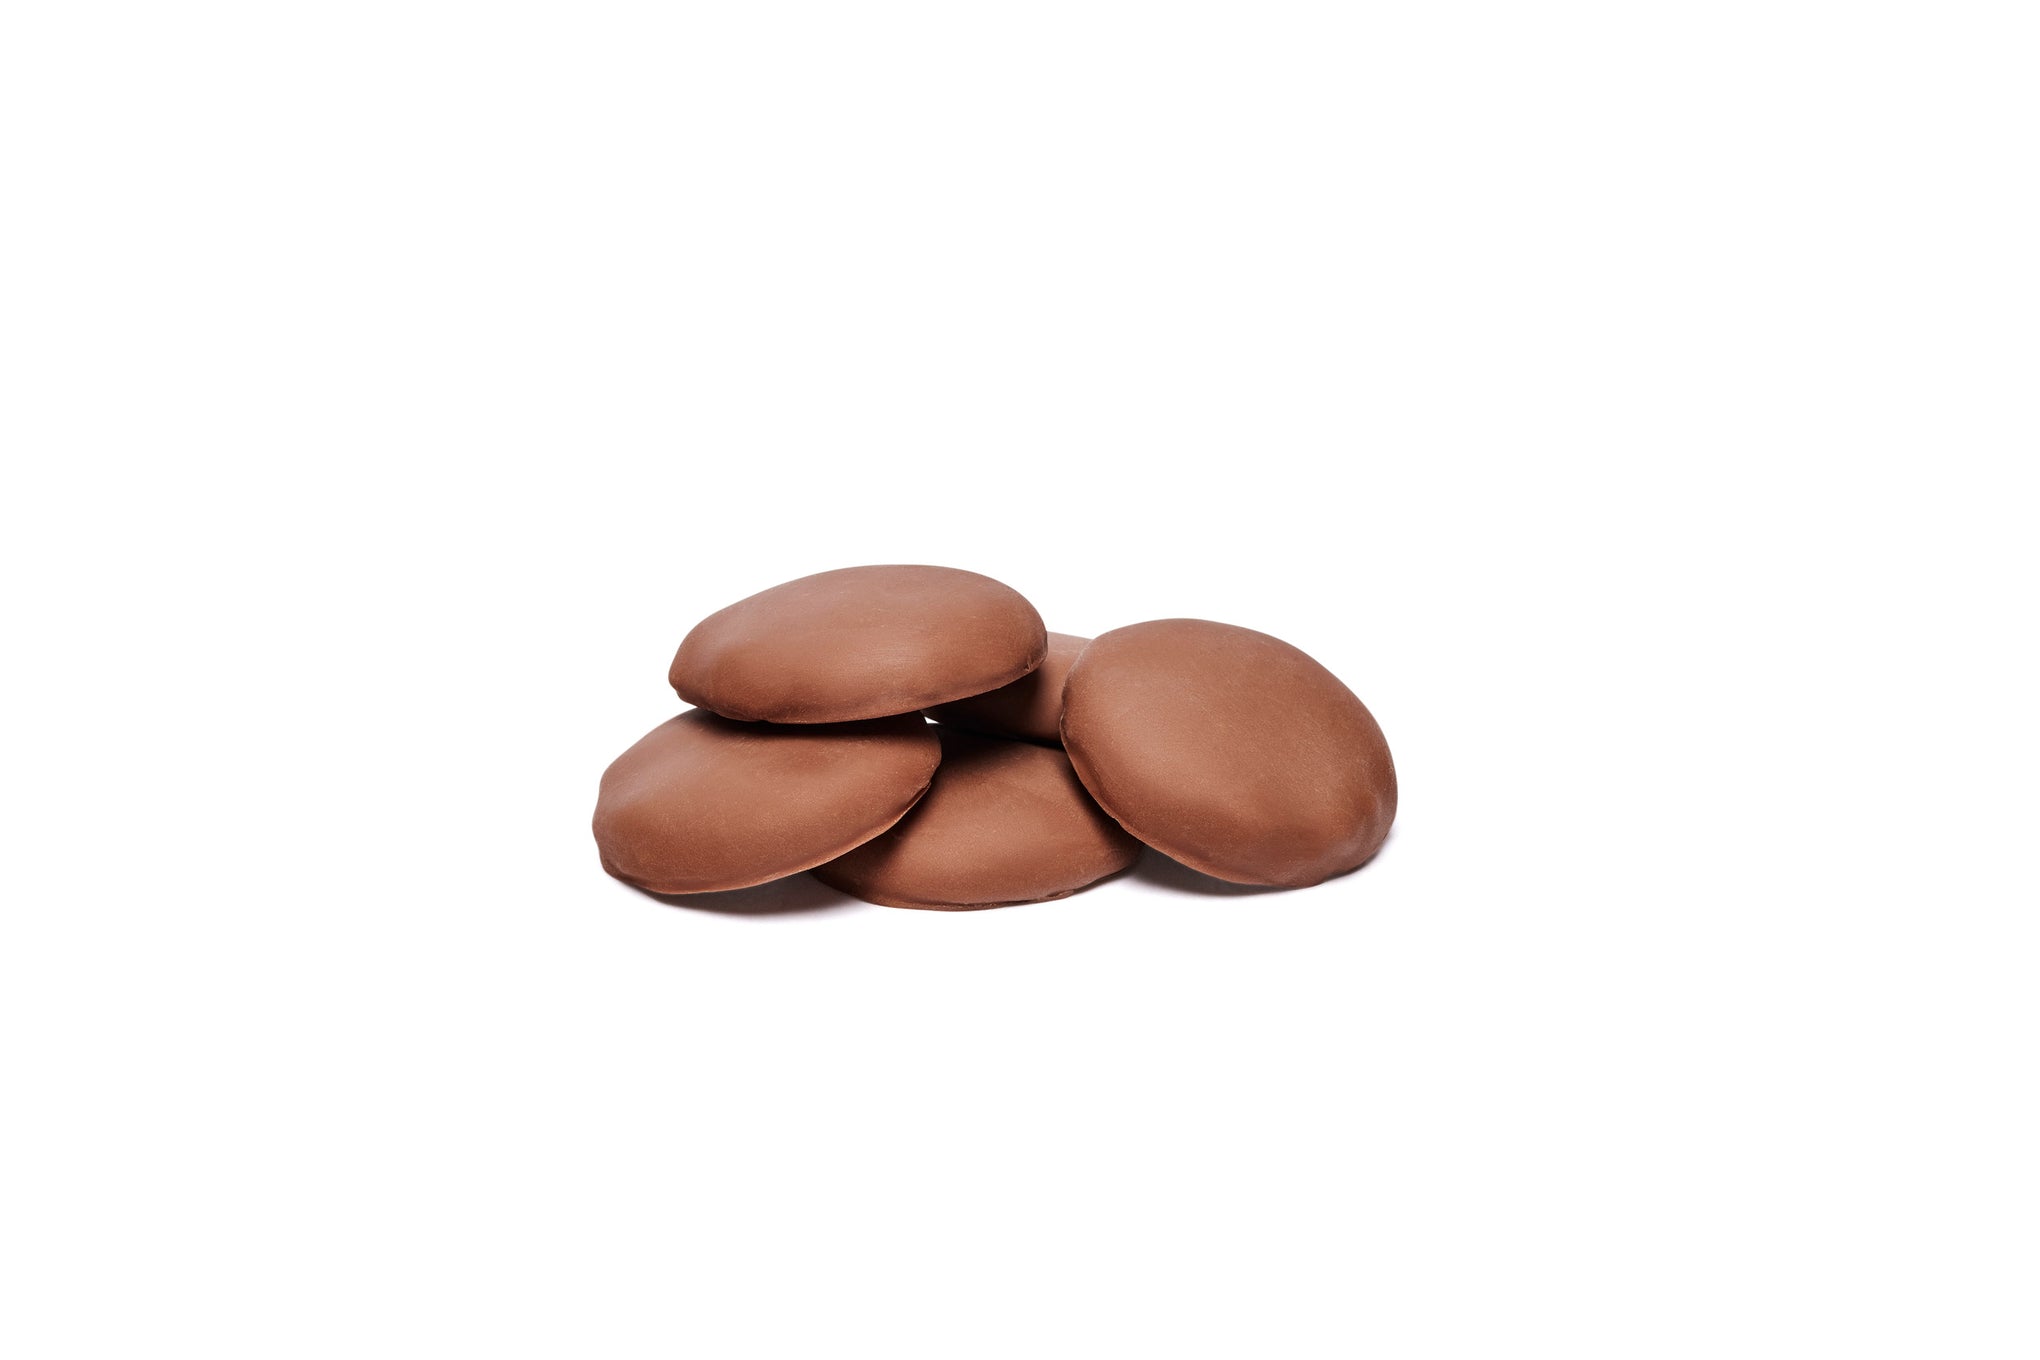 Stacked chocolate rounds